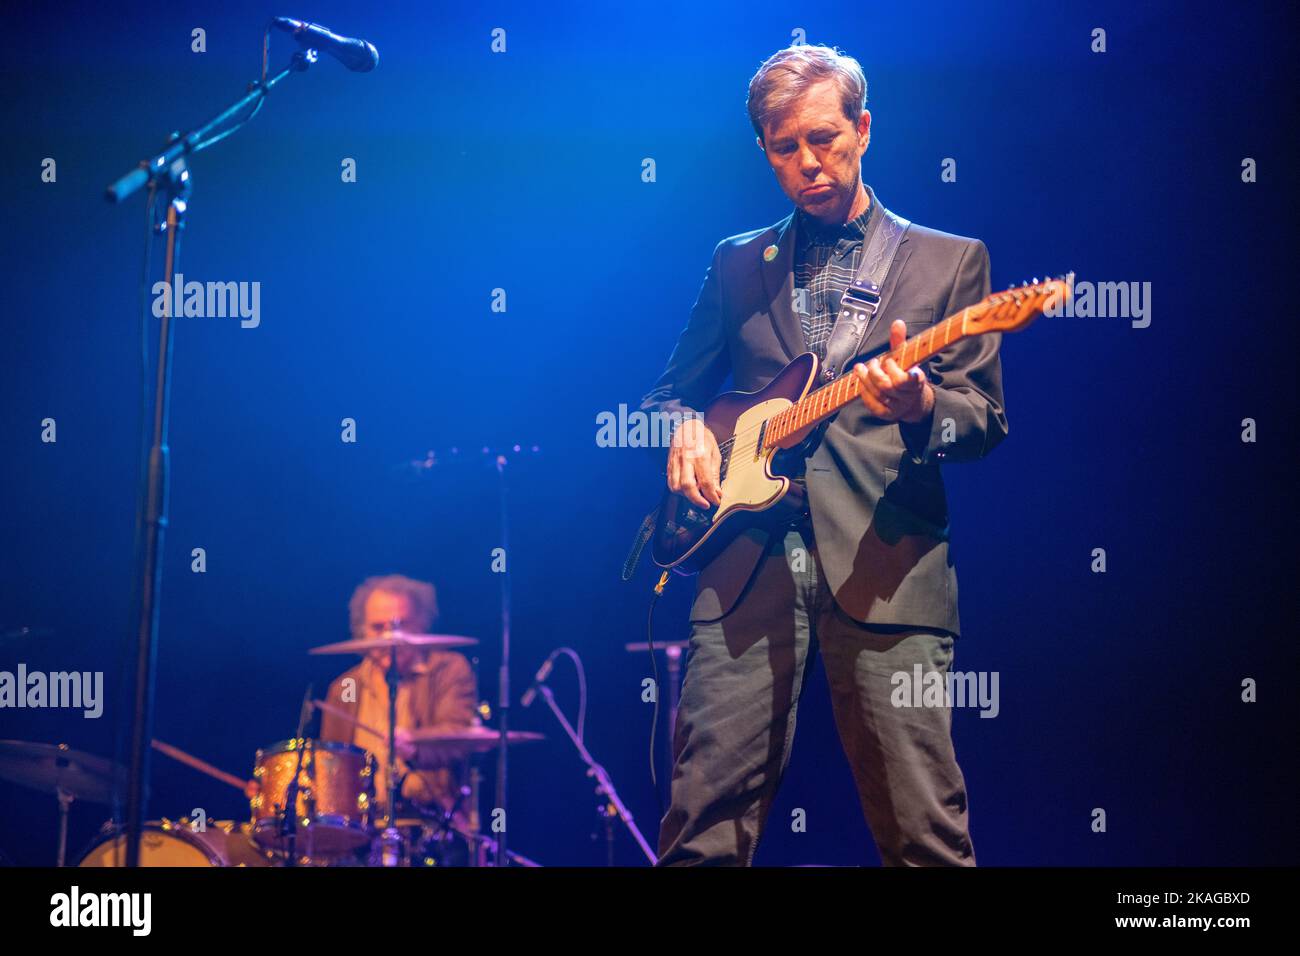 London, UK. Wednesday, 2 November, 2022. Bill Callahan performing live on stage at The Roundhouse in London. Photo: Richard Gray/Alamy Live News Stock Photo